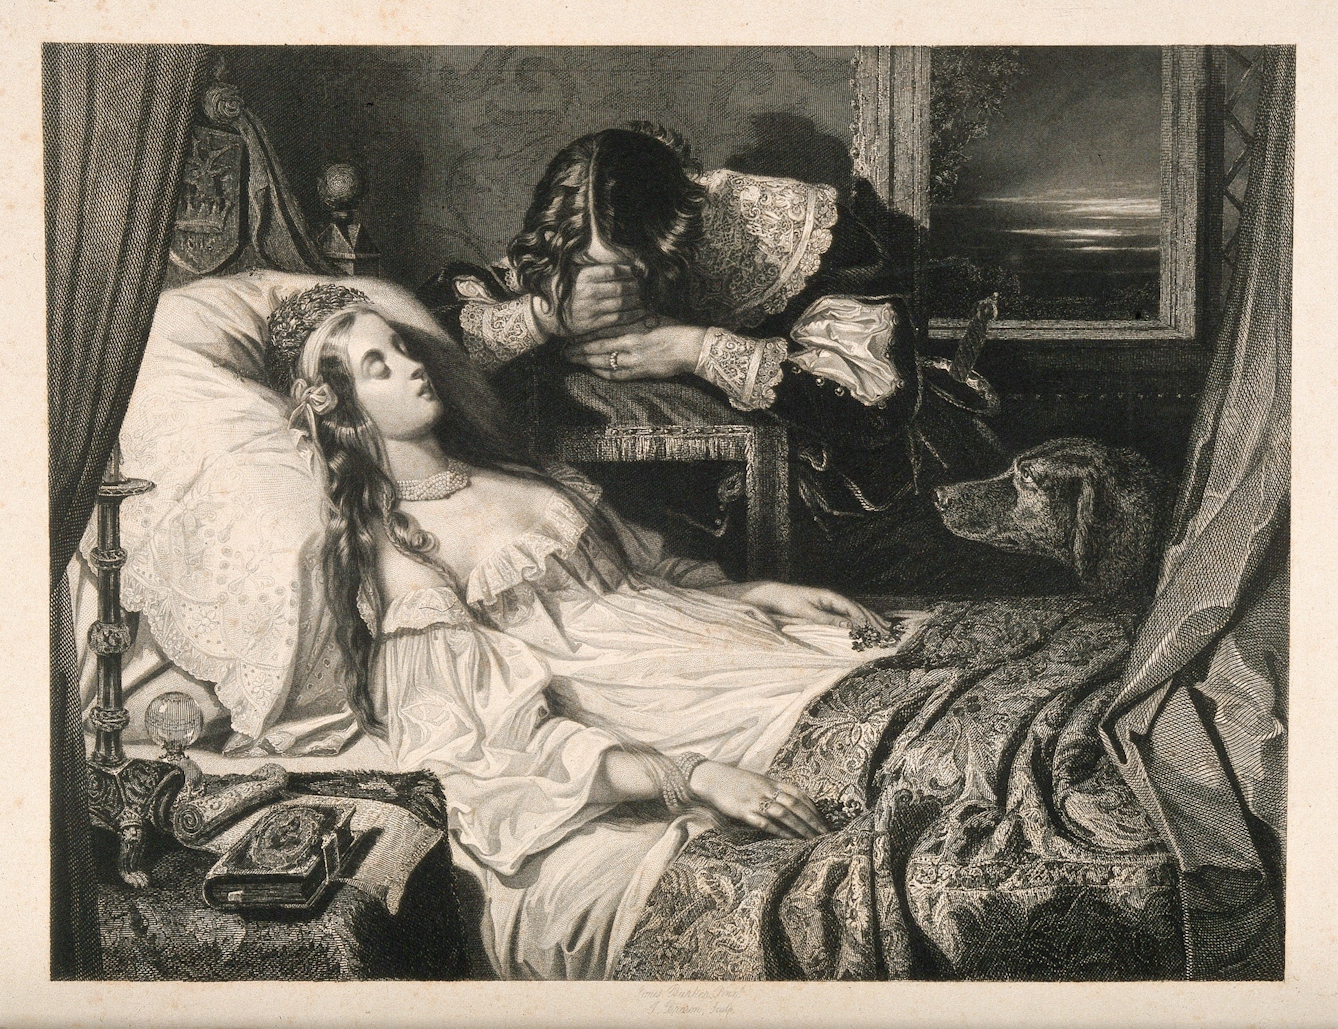 An engraving depicting a young man wearing a dark tunic with a large lace collar mourning the death of a young woman in her bed. The women is wearing a long white dress and has long hair with a bow.